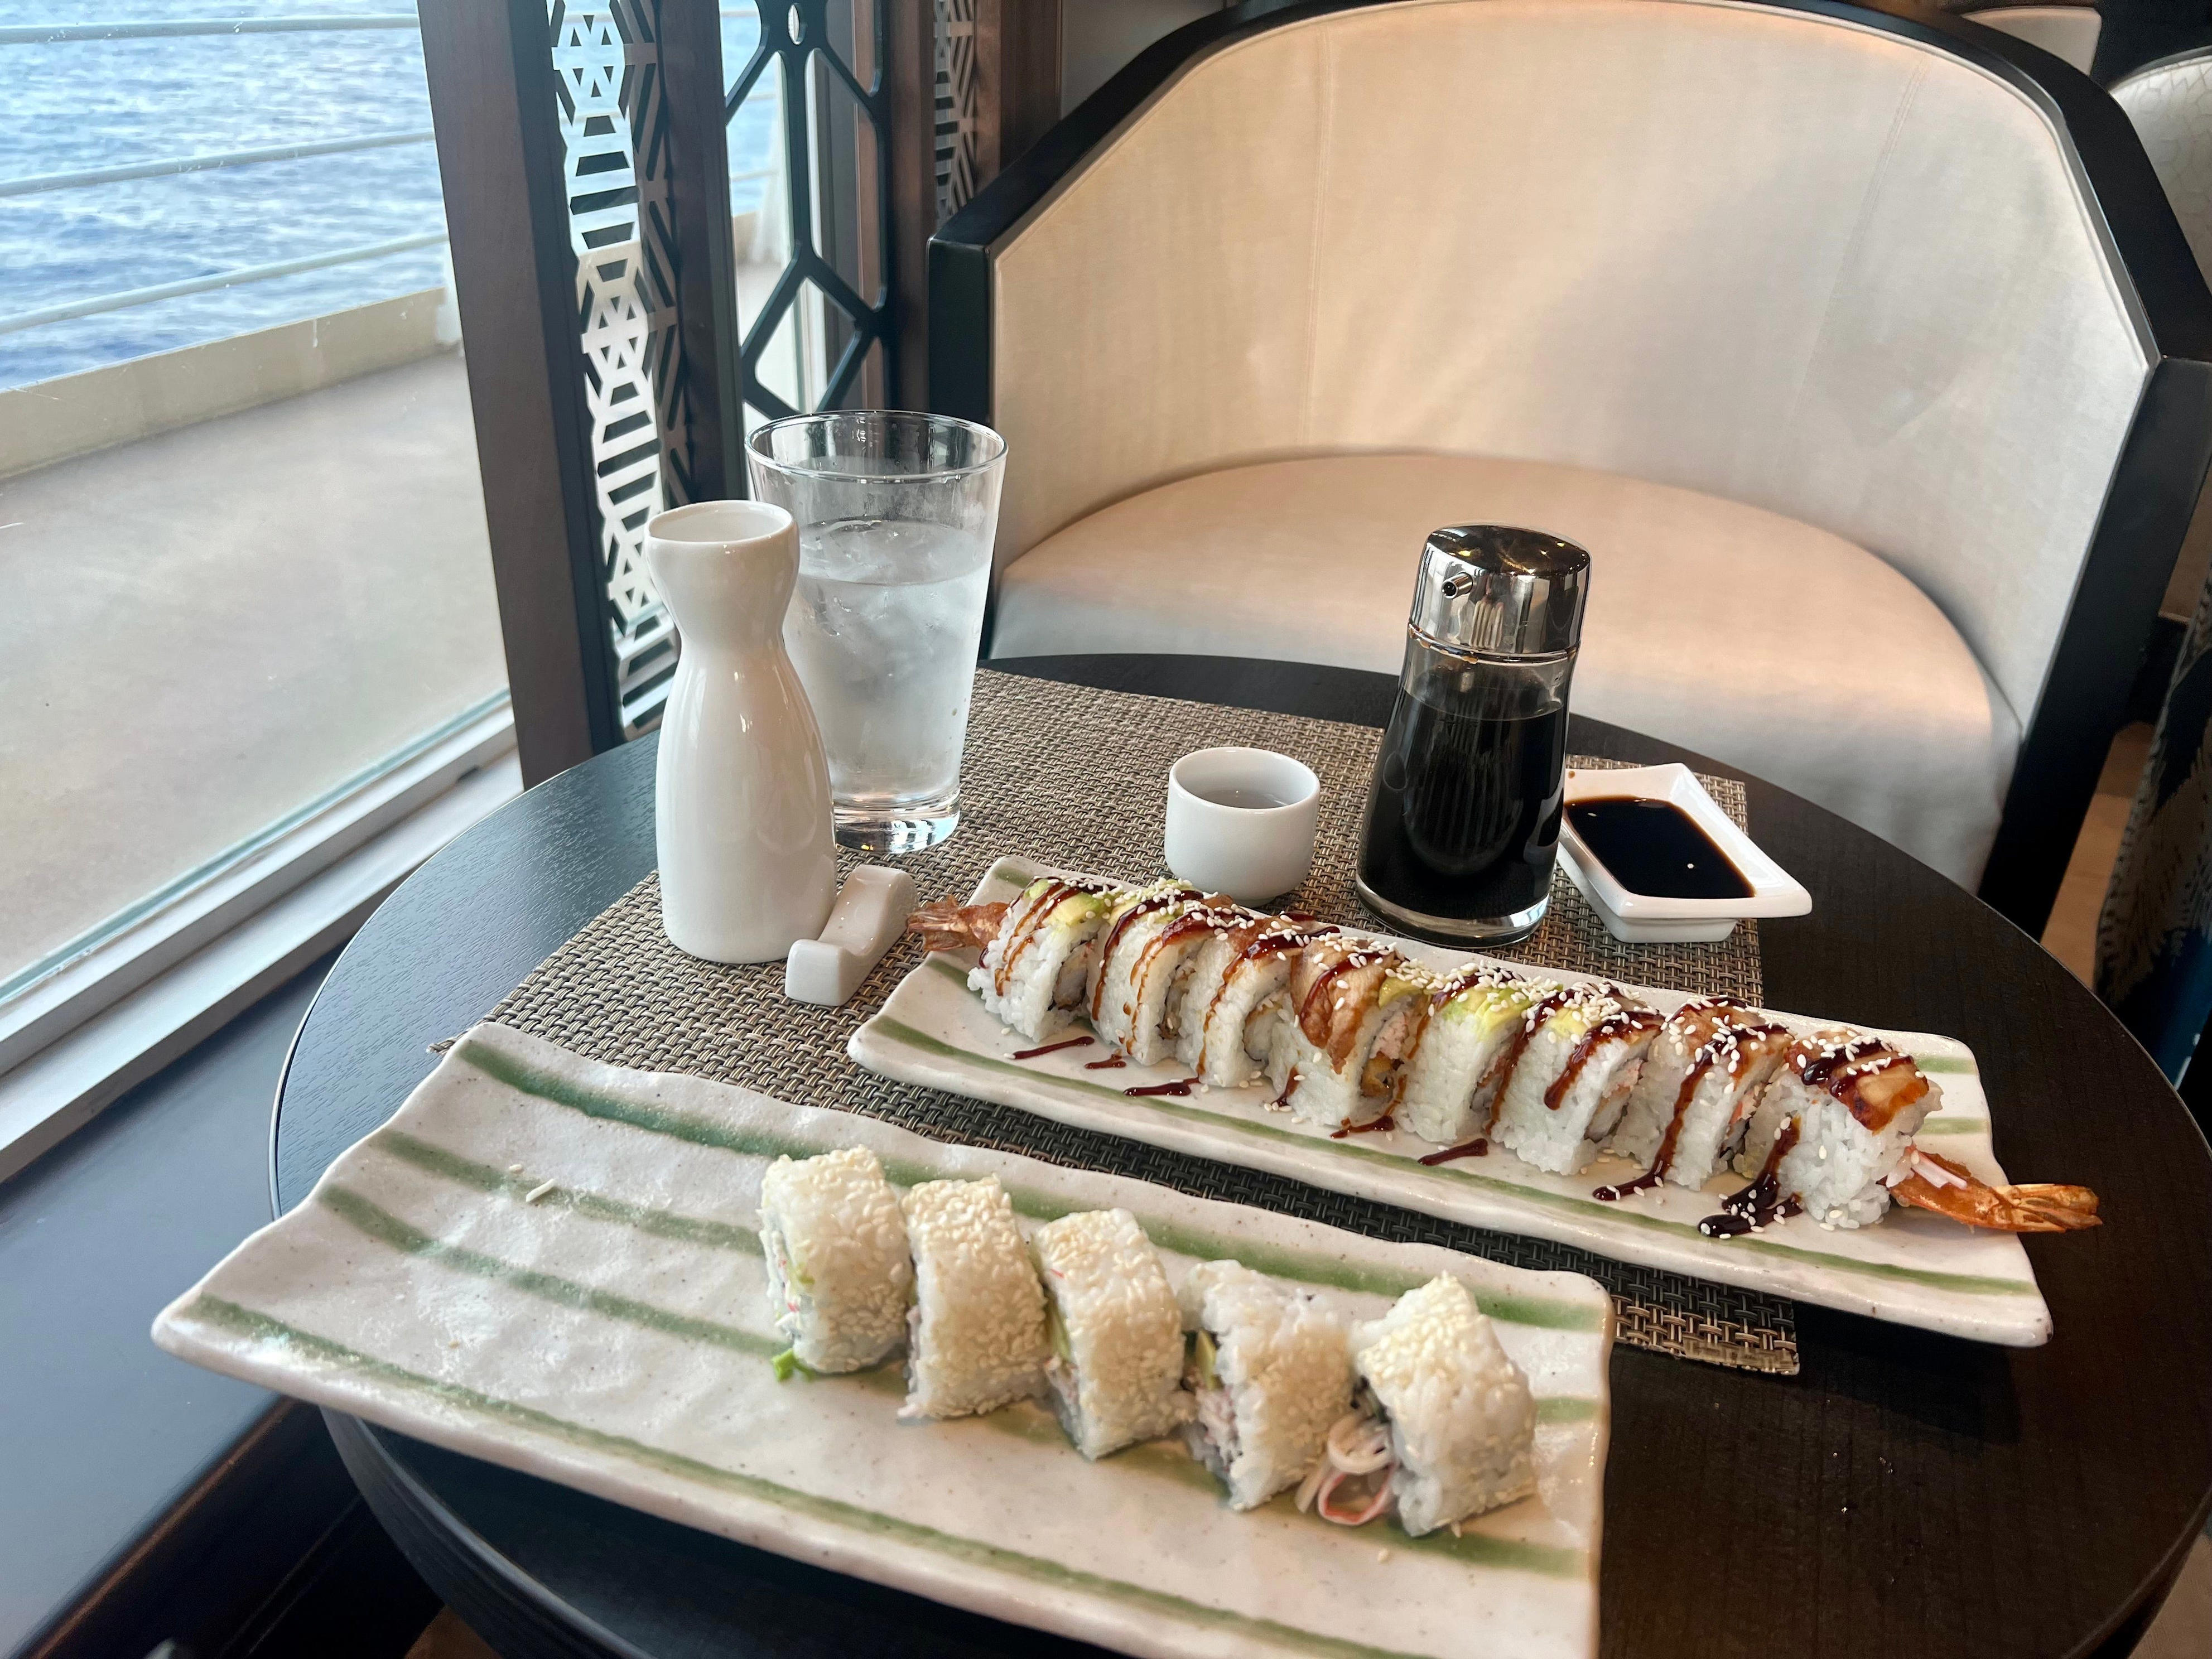 <p>The sushi option was one of the cheaper specialty meals available, and I tried it just for fun.</p><p>While the food was good, it wasn't worth the money when there were plenty of free meals all around the ship.</p>